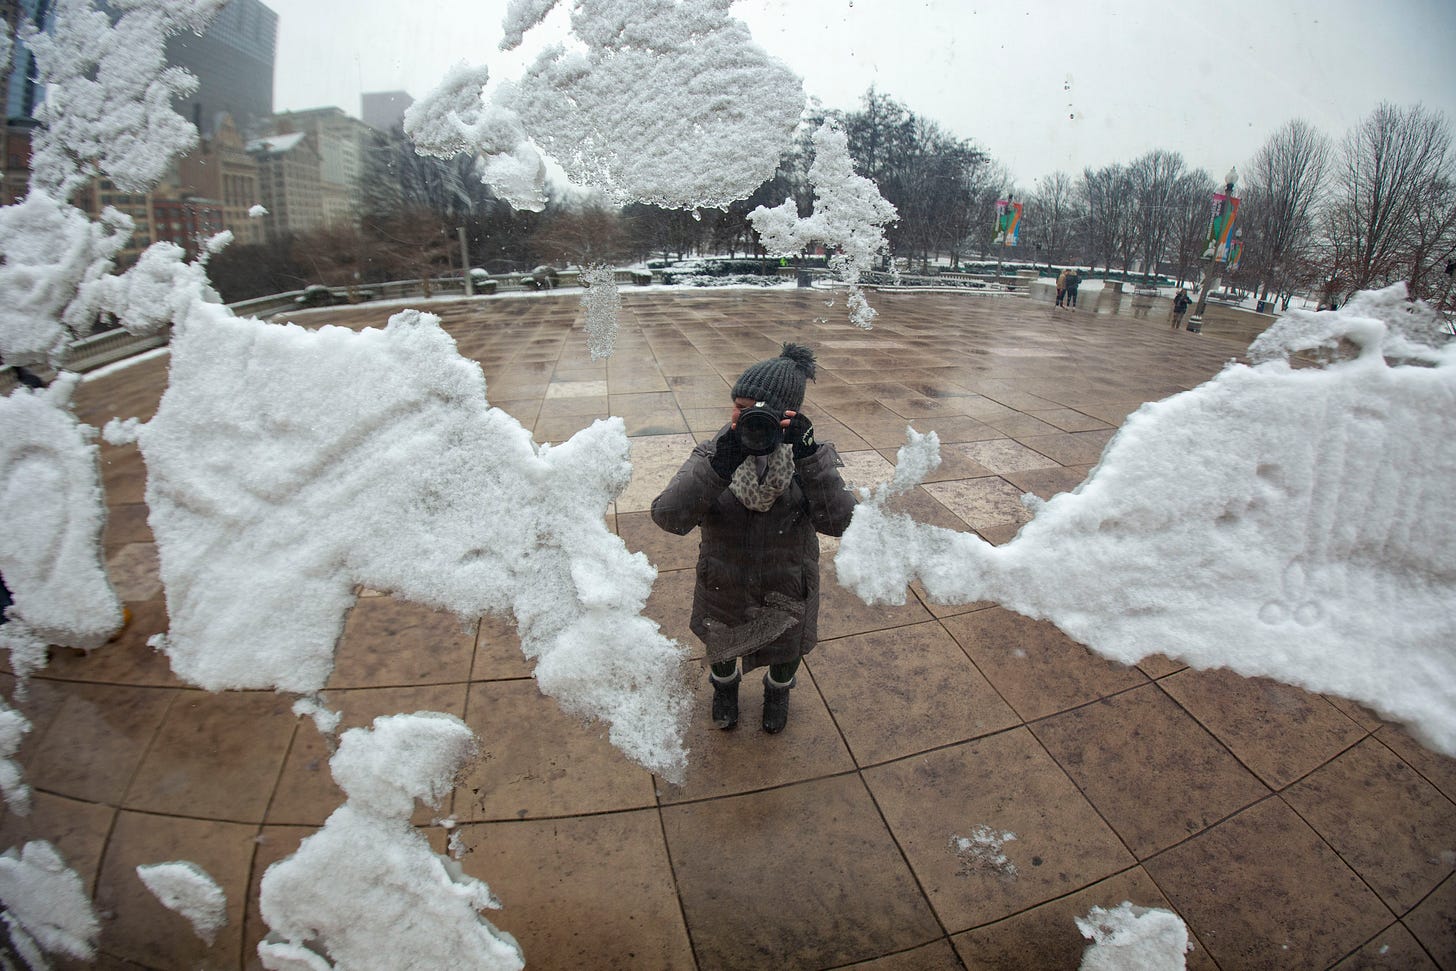 A woman taking a selfie in the Bean, which is covered with snow.